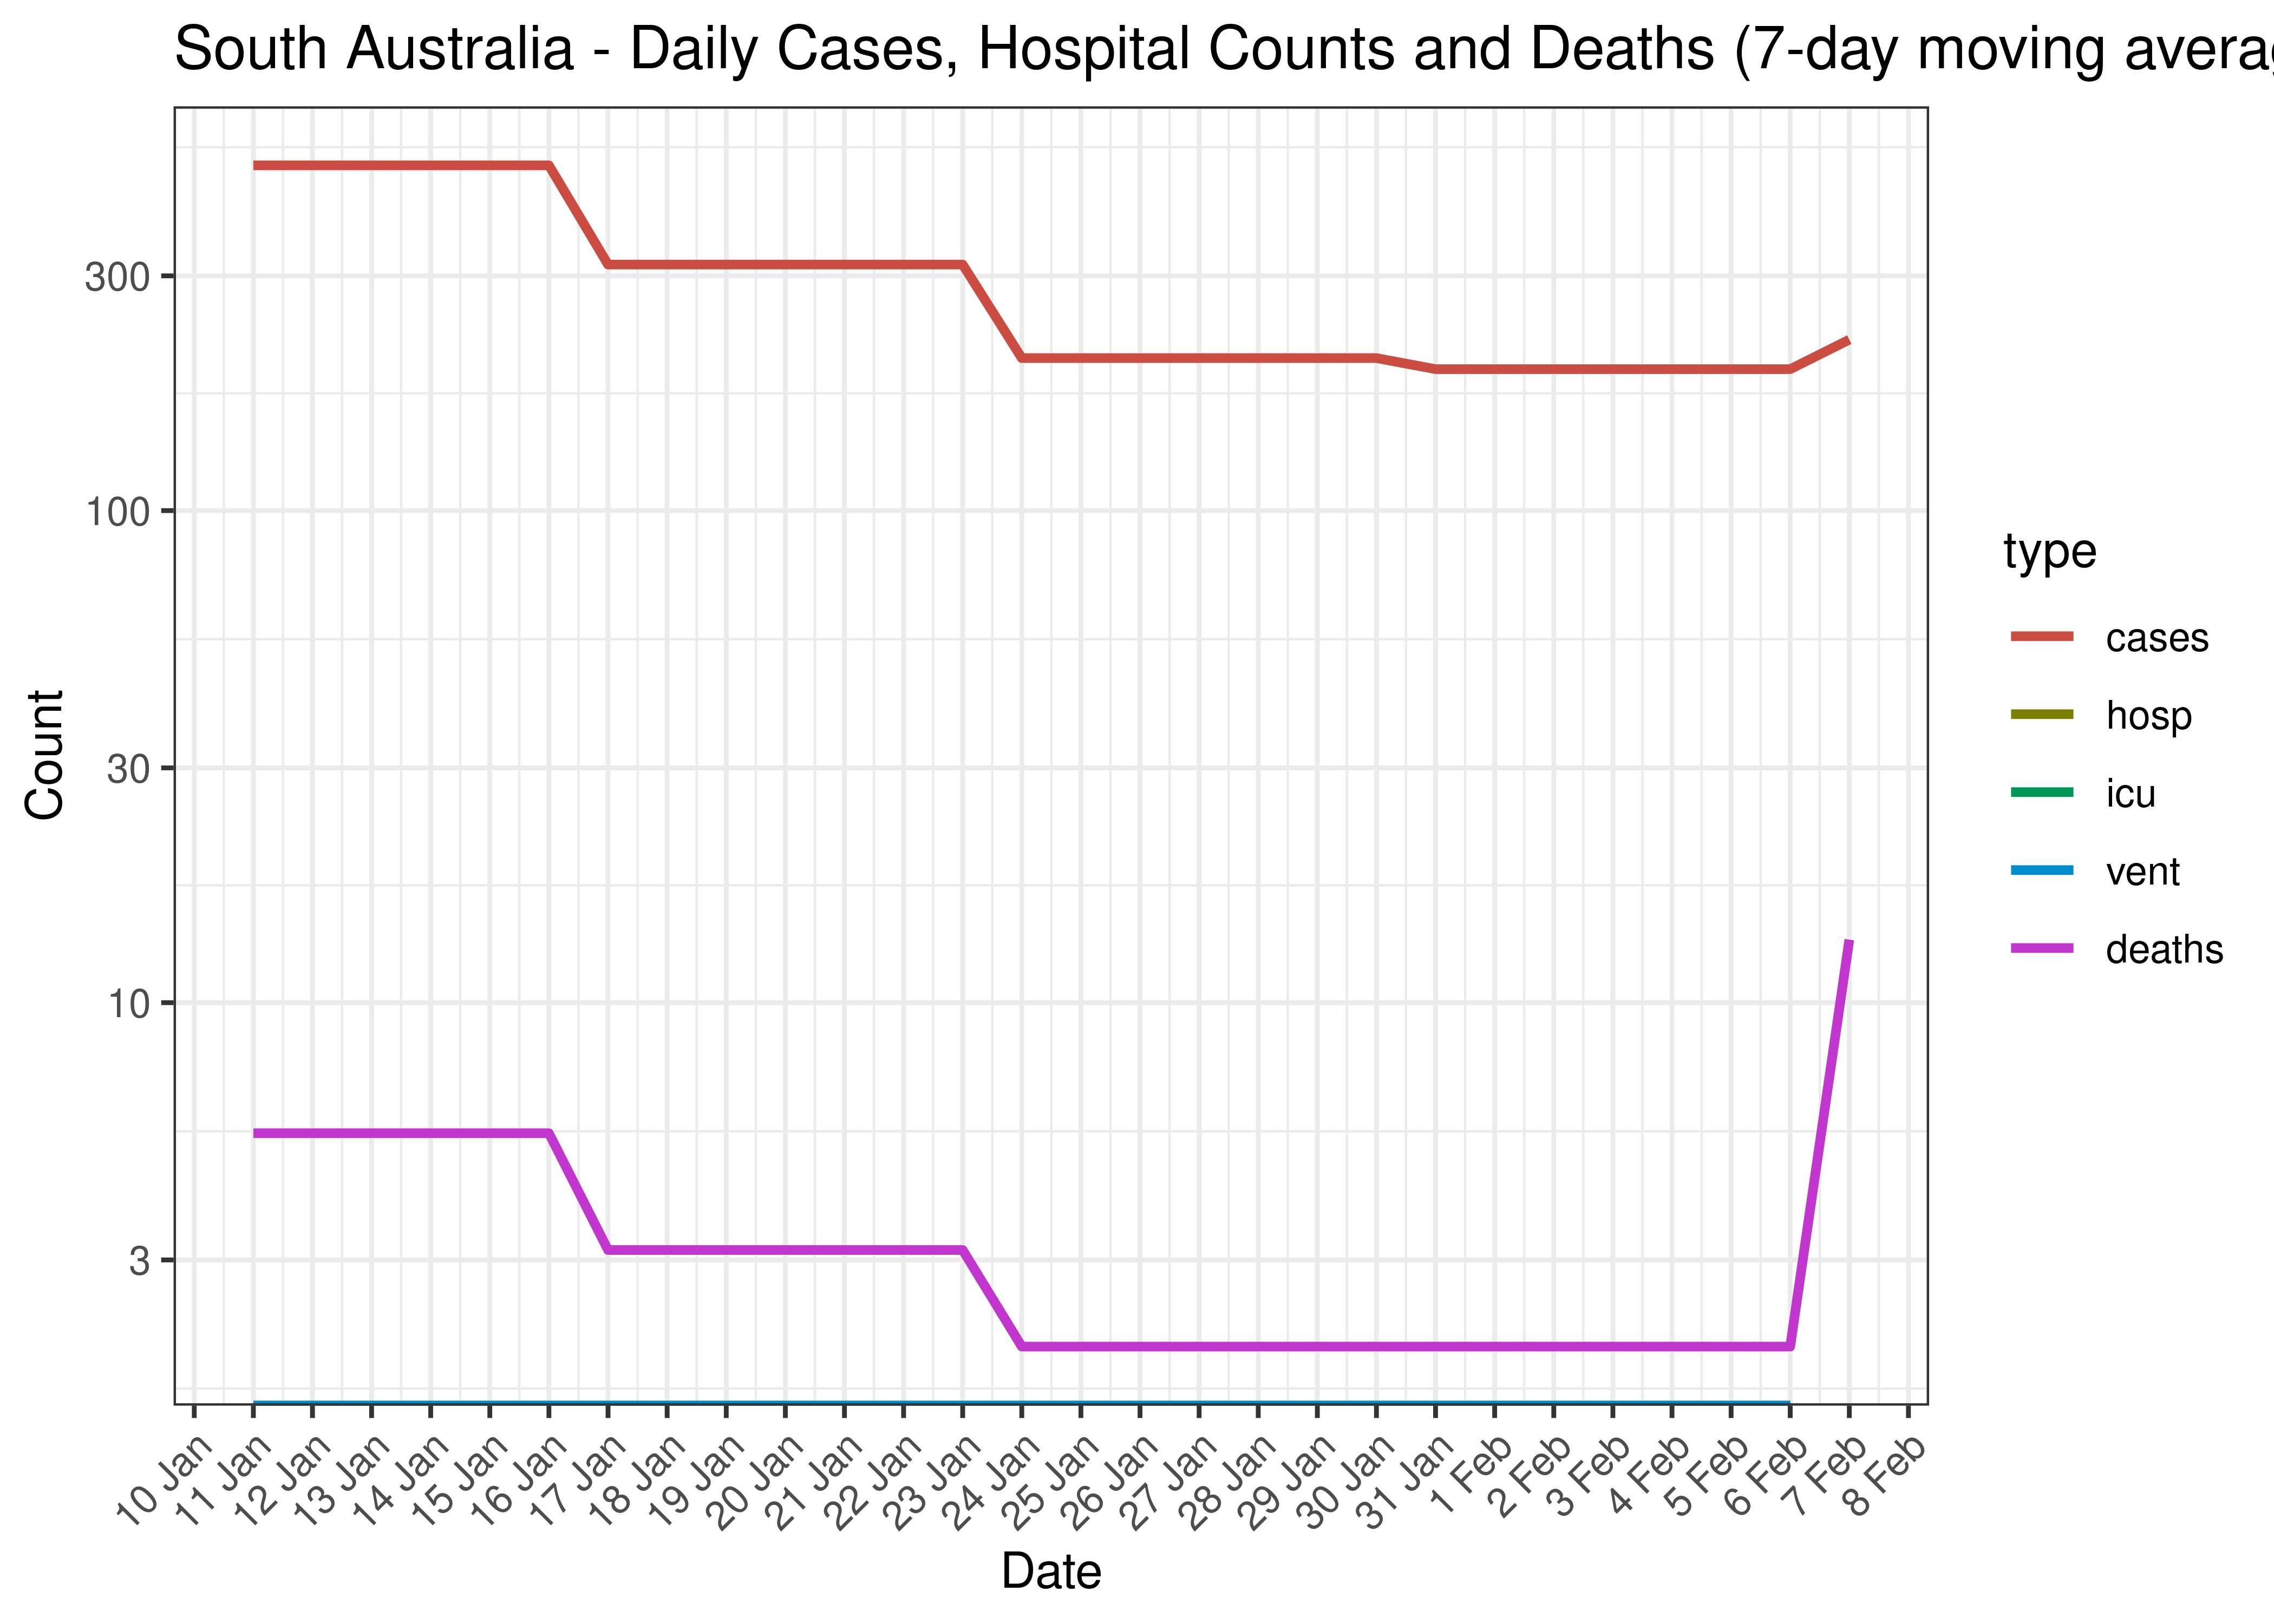 South Australia - Daily Cases, Admissions and Deaths for Last 30-days (7-day moving average)